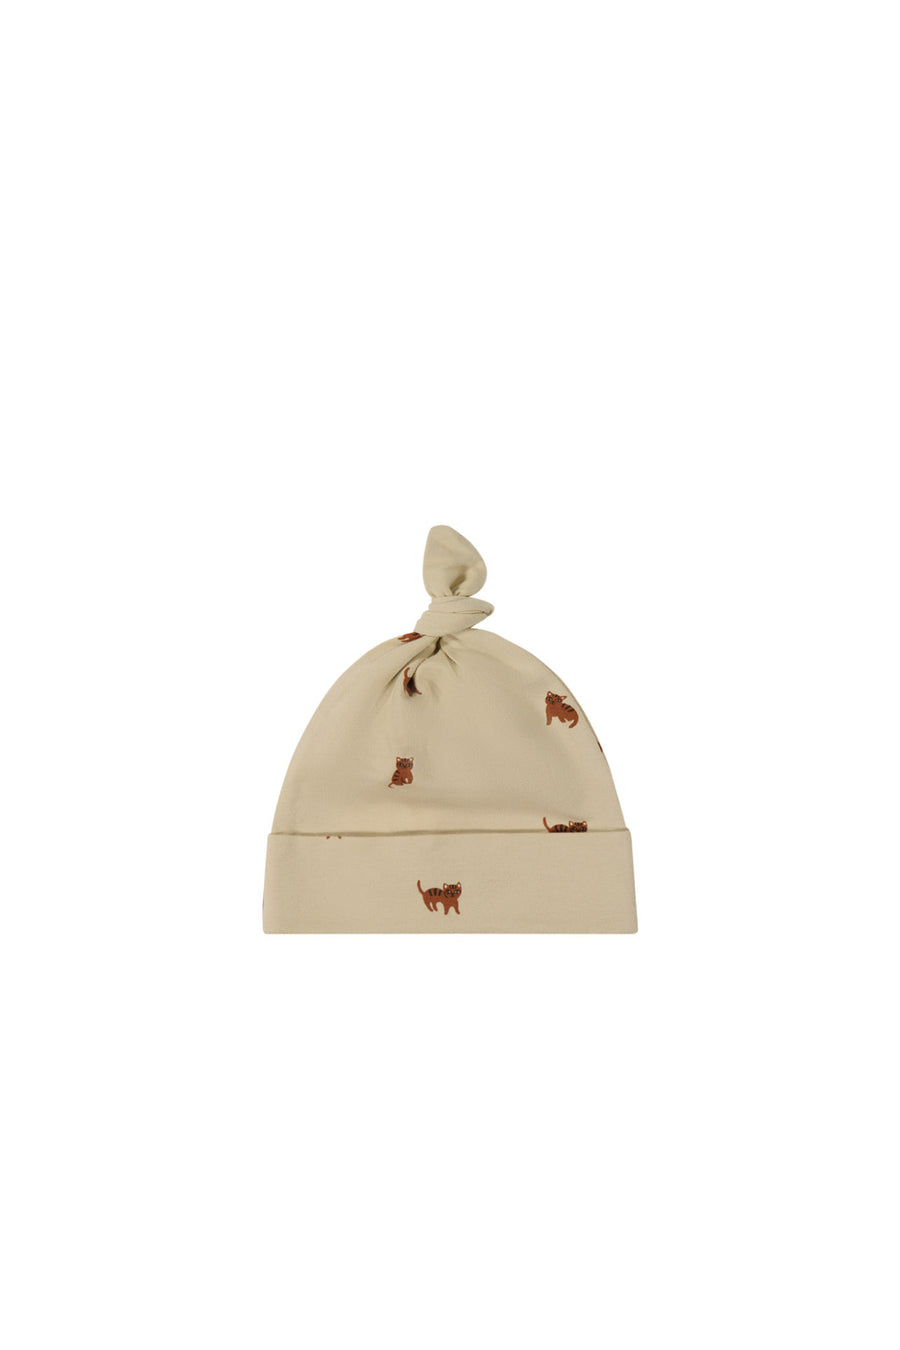 Organic Cotton Knot Beanie - Tommy Tigers Childrens Hat from Jamie Kay NZ